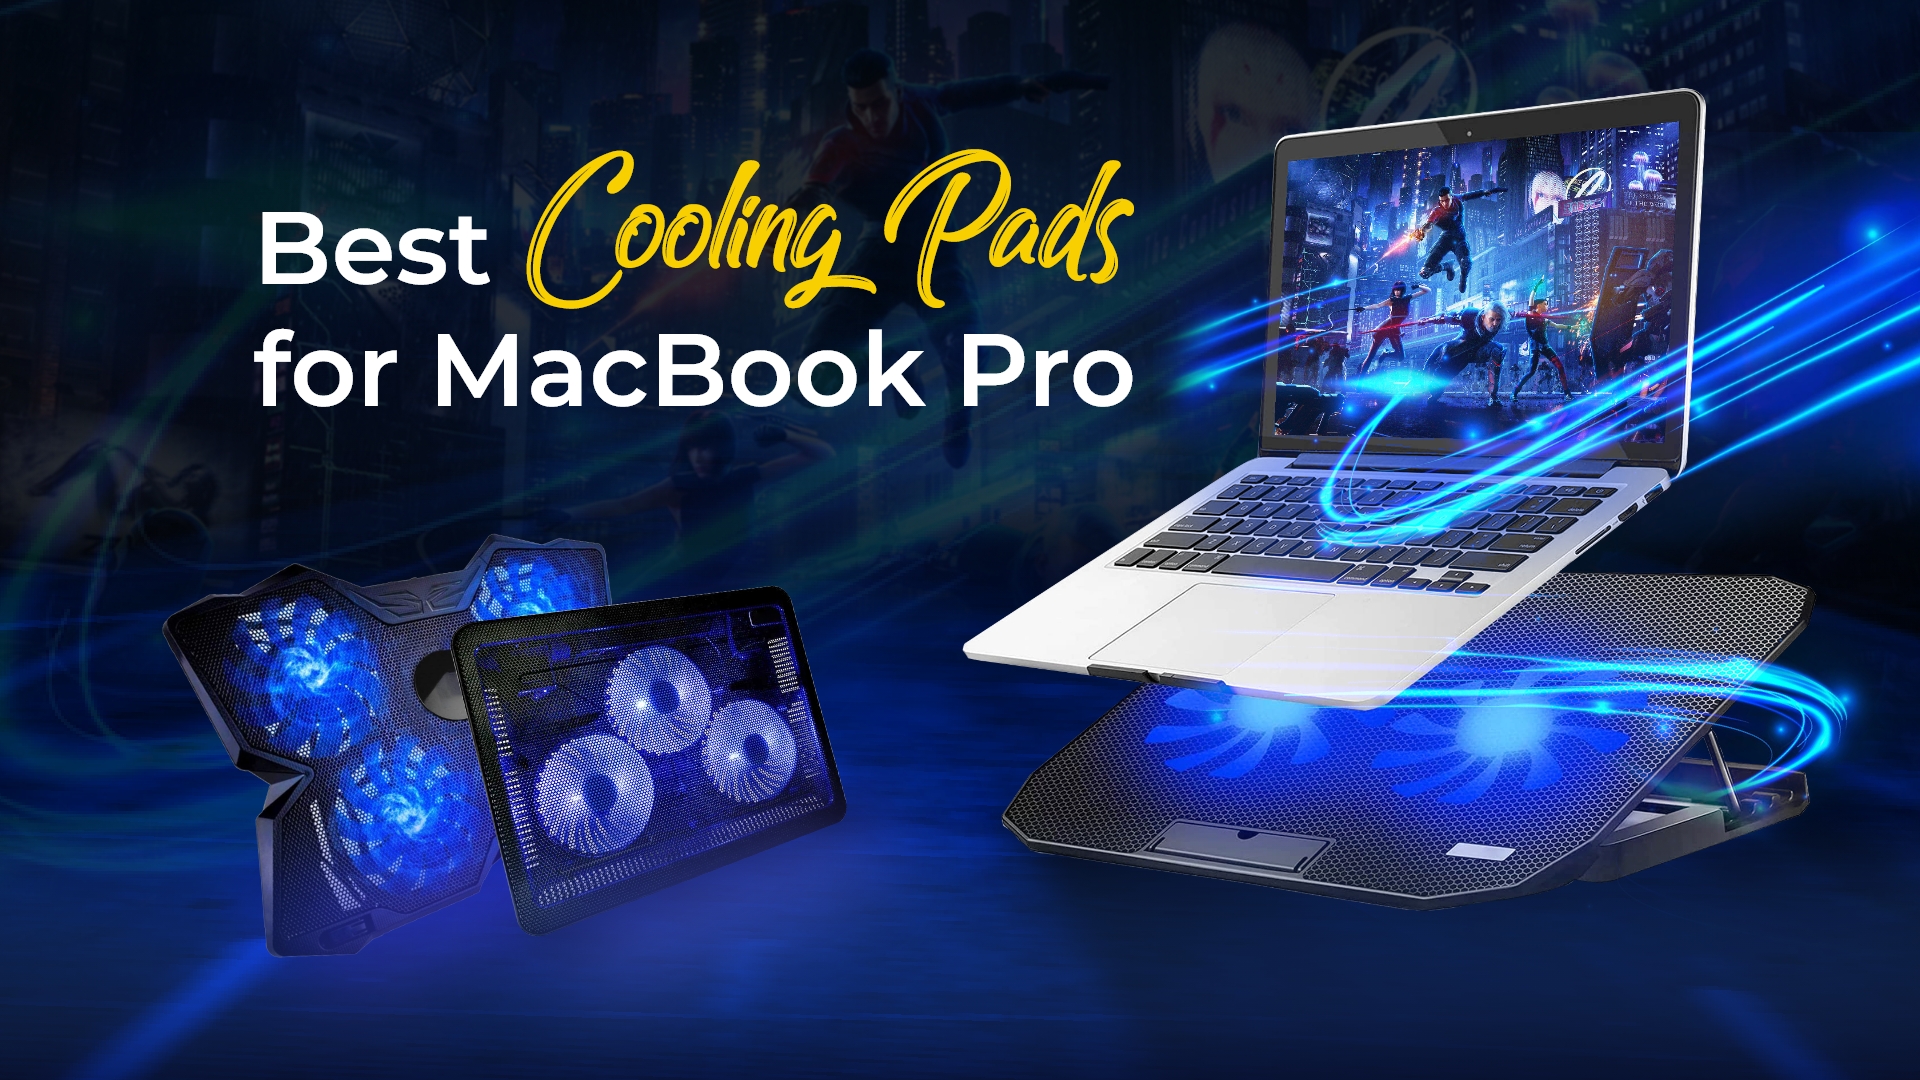 Best Cooling Pads for MacBook Pro in 2022